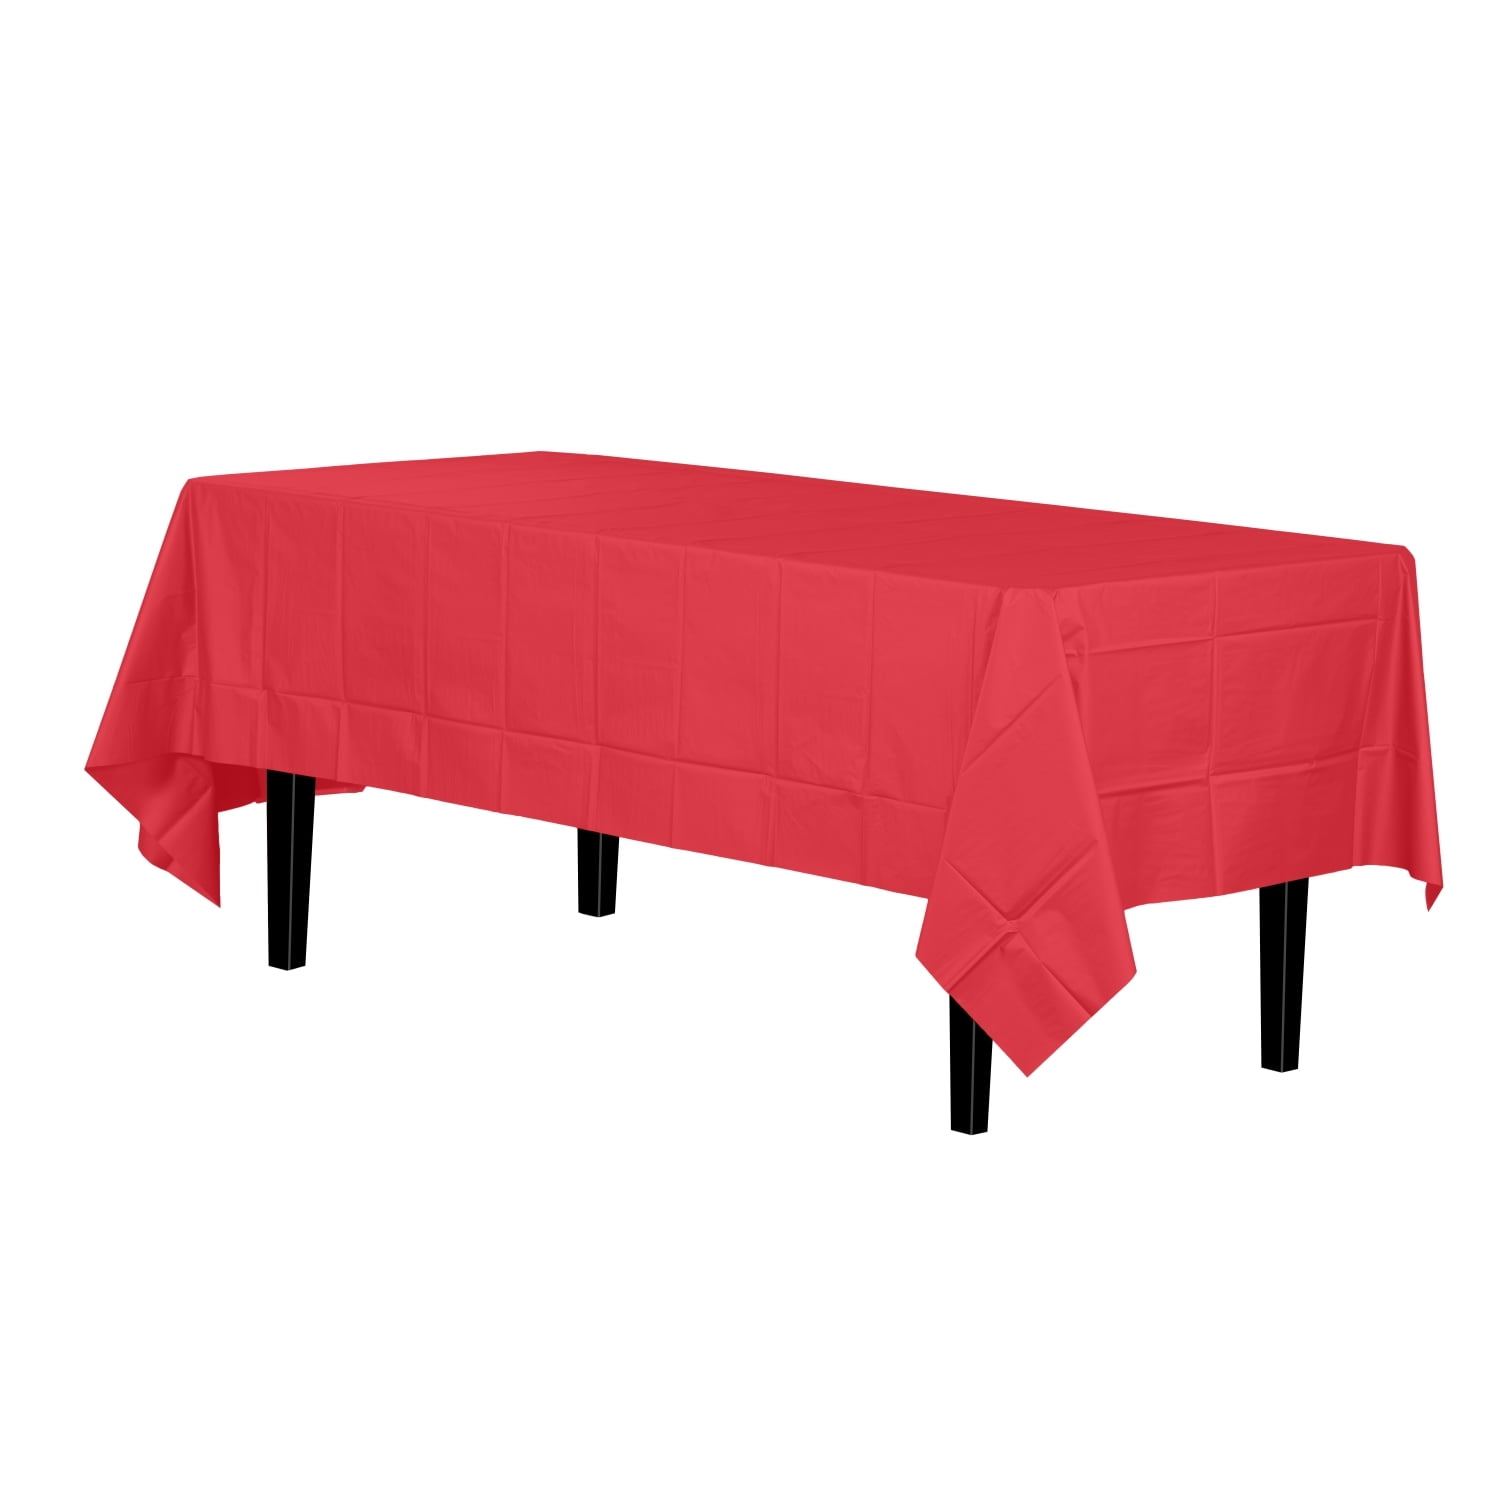 Red RECTANGLE 54x108" Chevron Disposable Plastic Tablecloth Table Covers SALE 